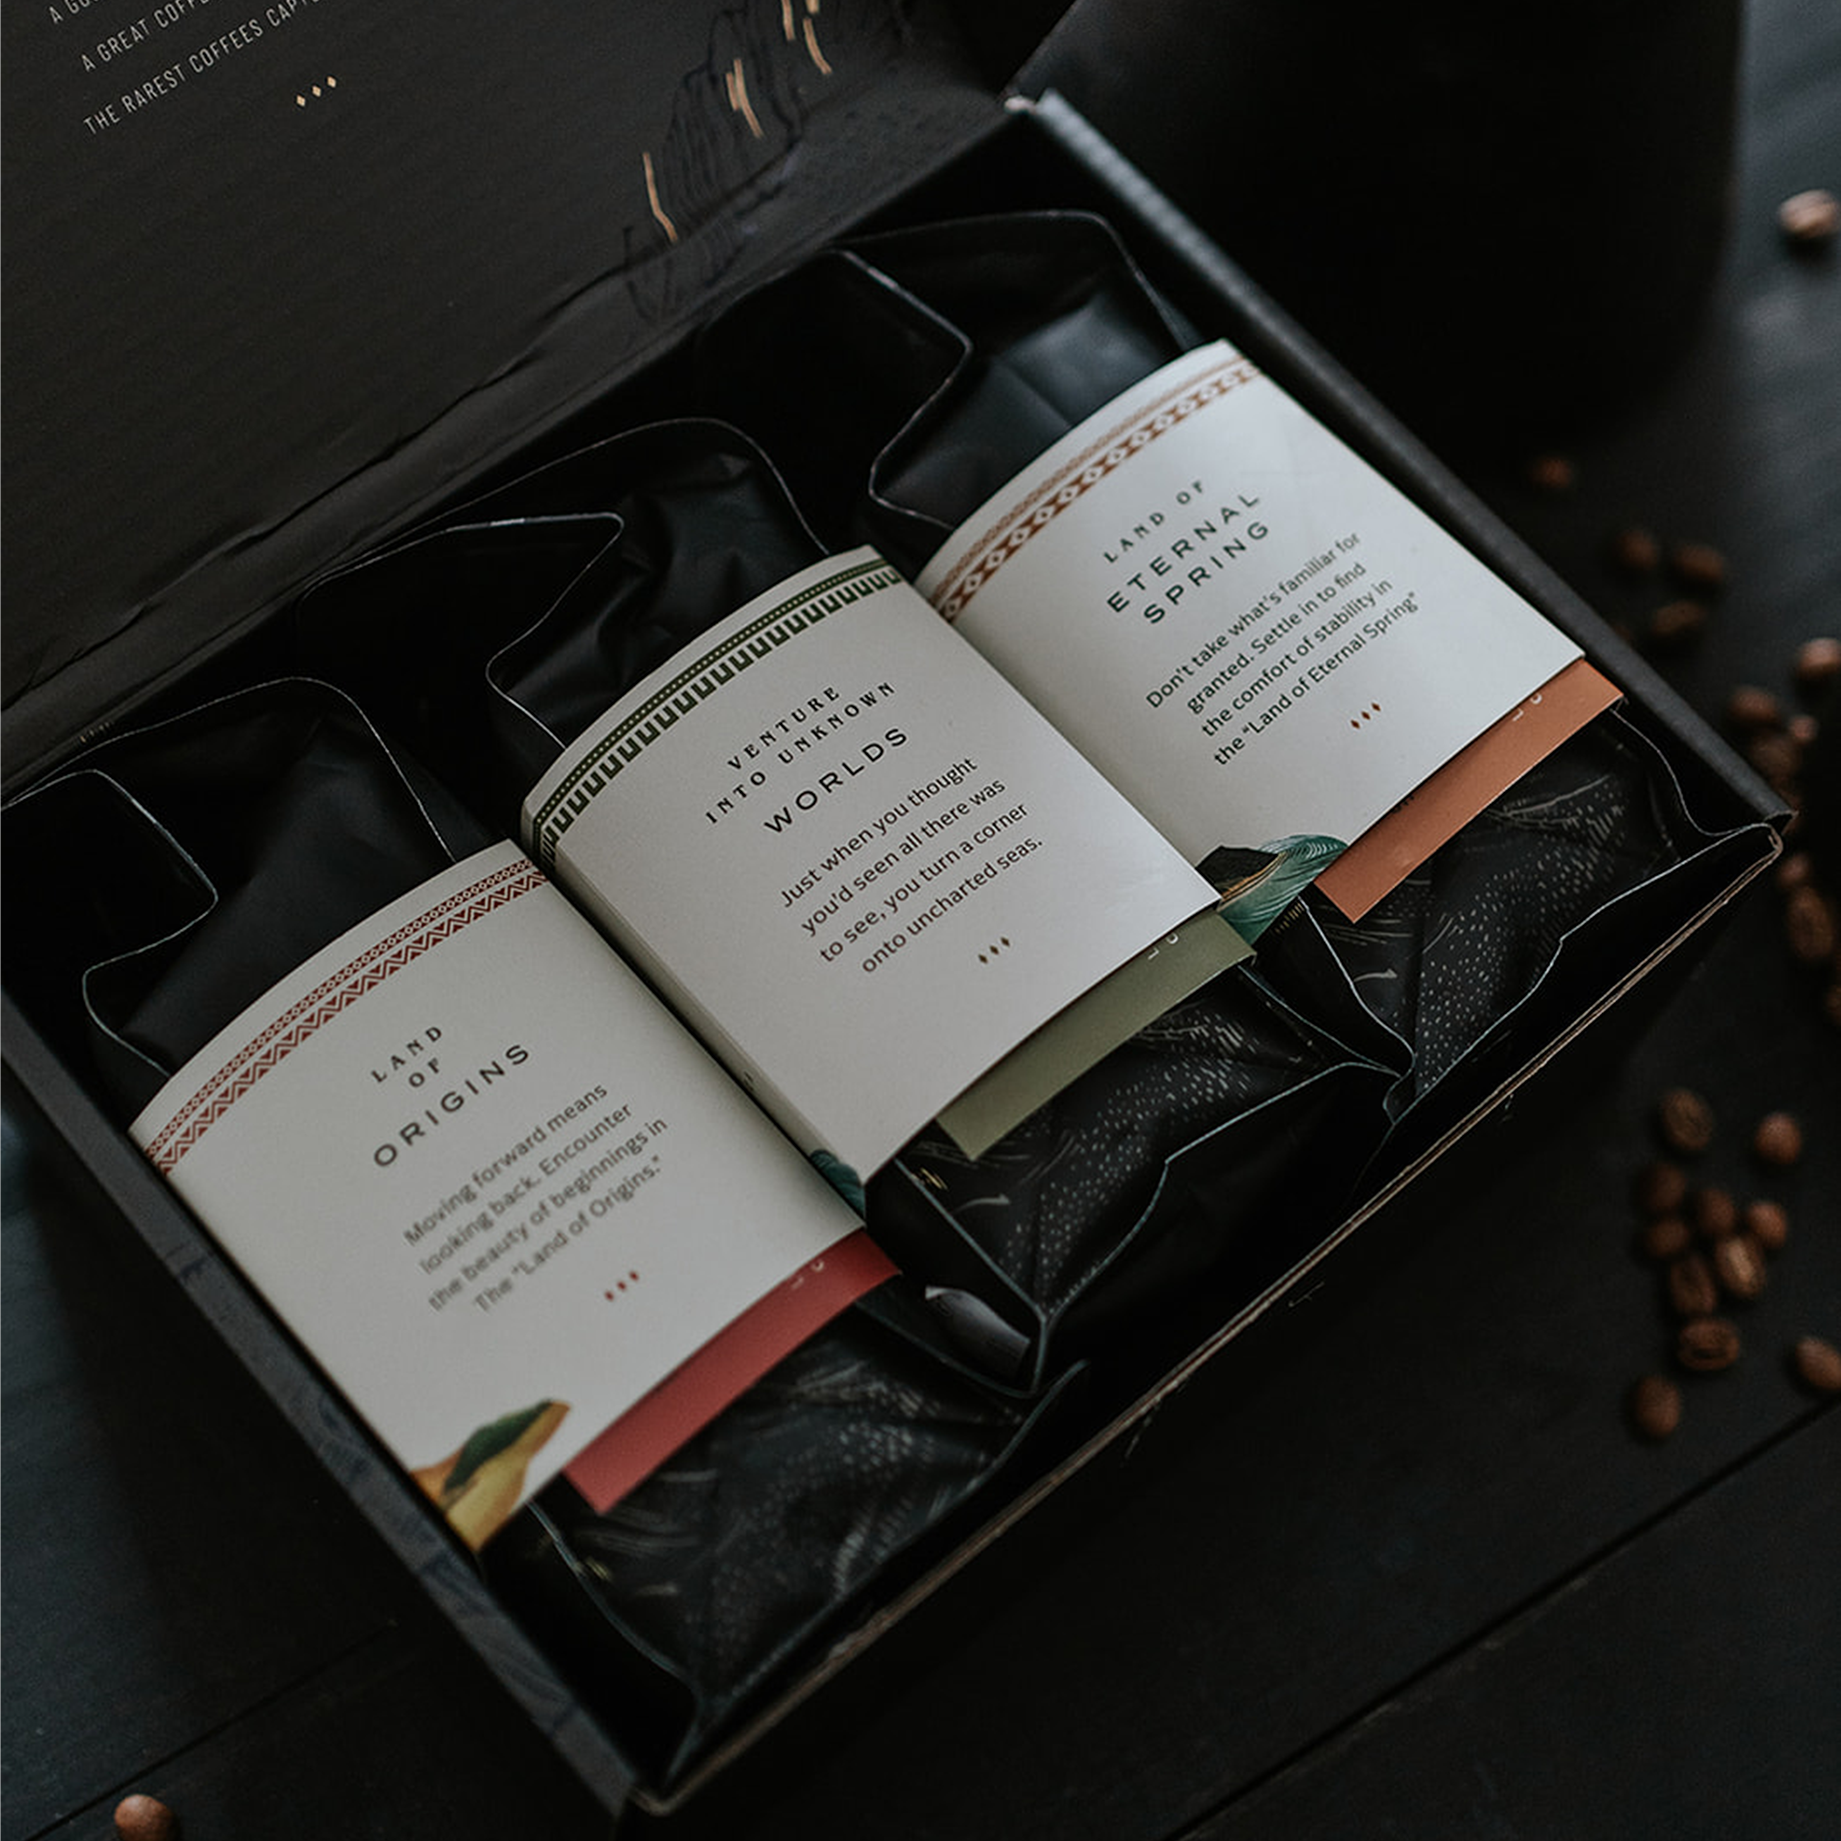 Shop our Craft Coffee for the holidays! This tasters box gifts you with an amazing craft blend and two single origin coffees!